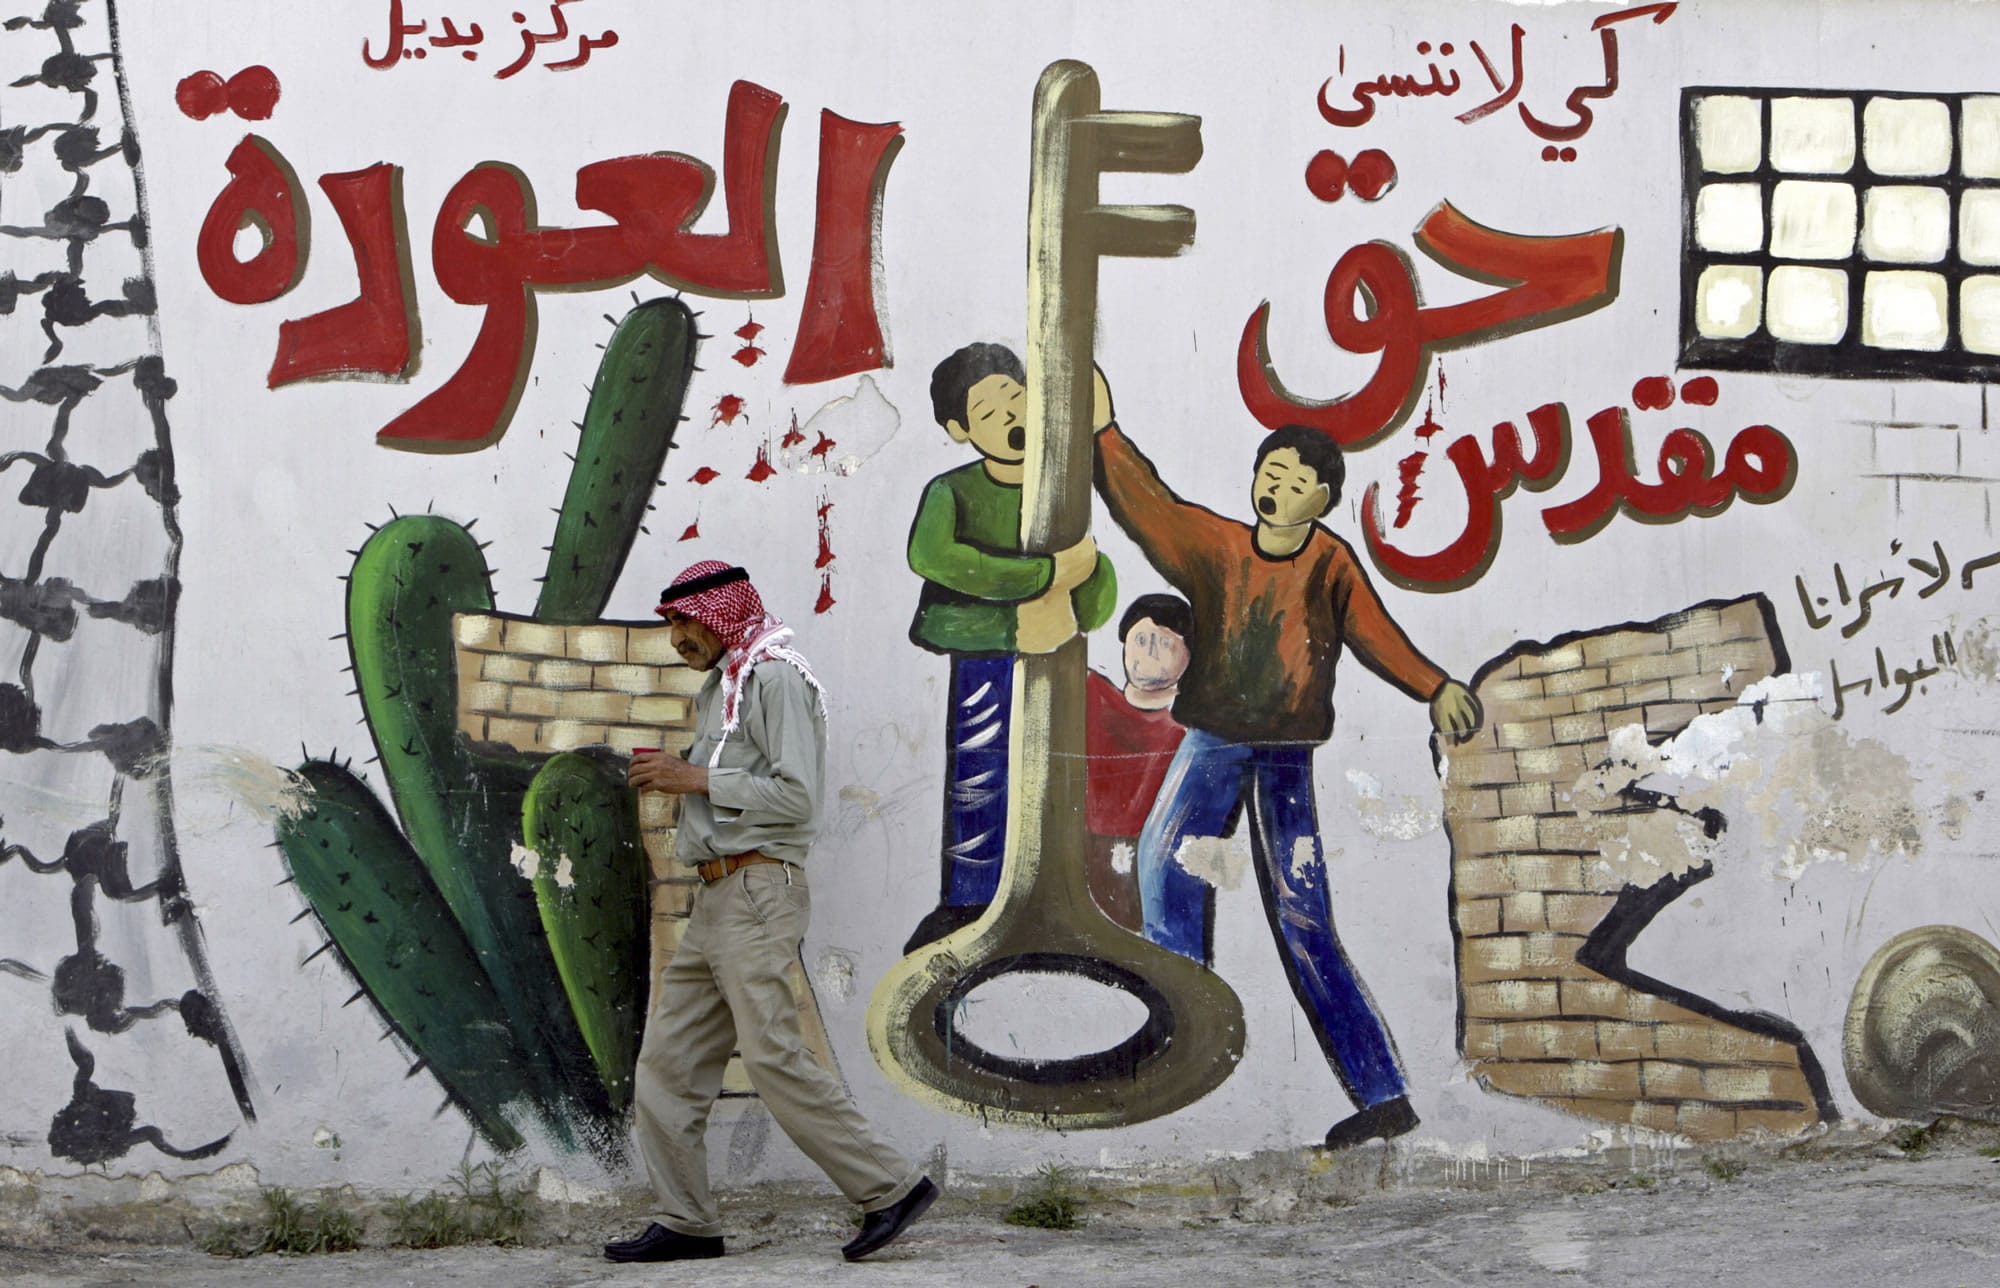 Palestinian refugee Mahmoud Al-Amer, 78, walks past a mural in the West Bank refugee camp of Jenin on Monday.